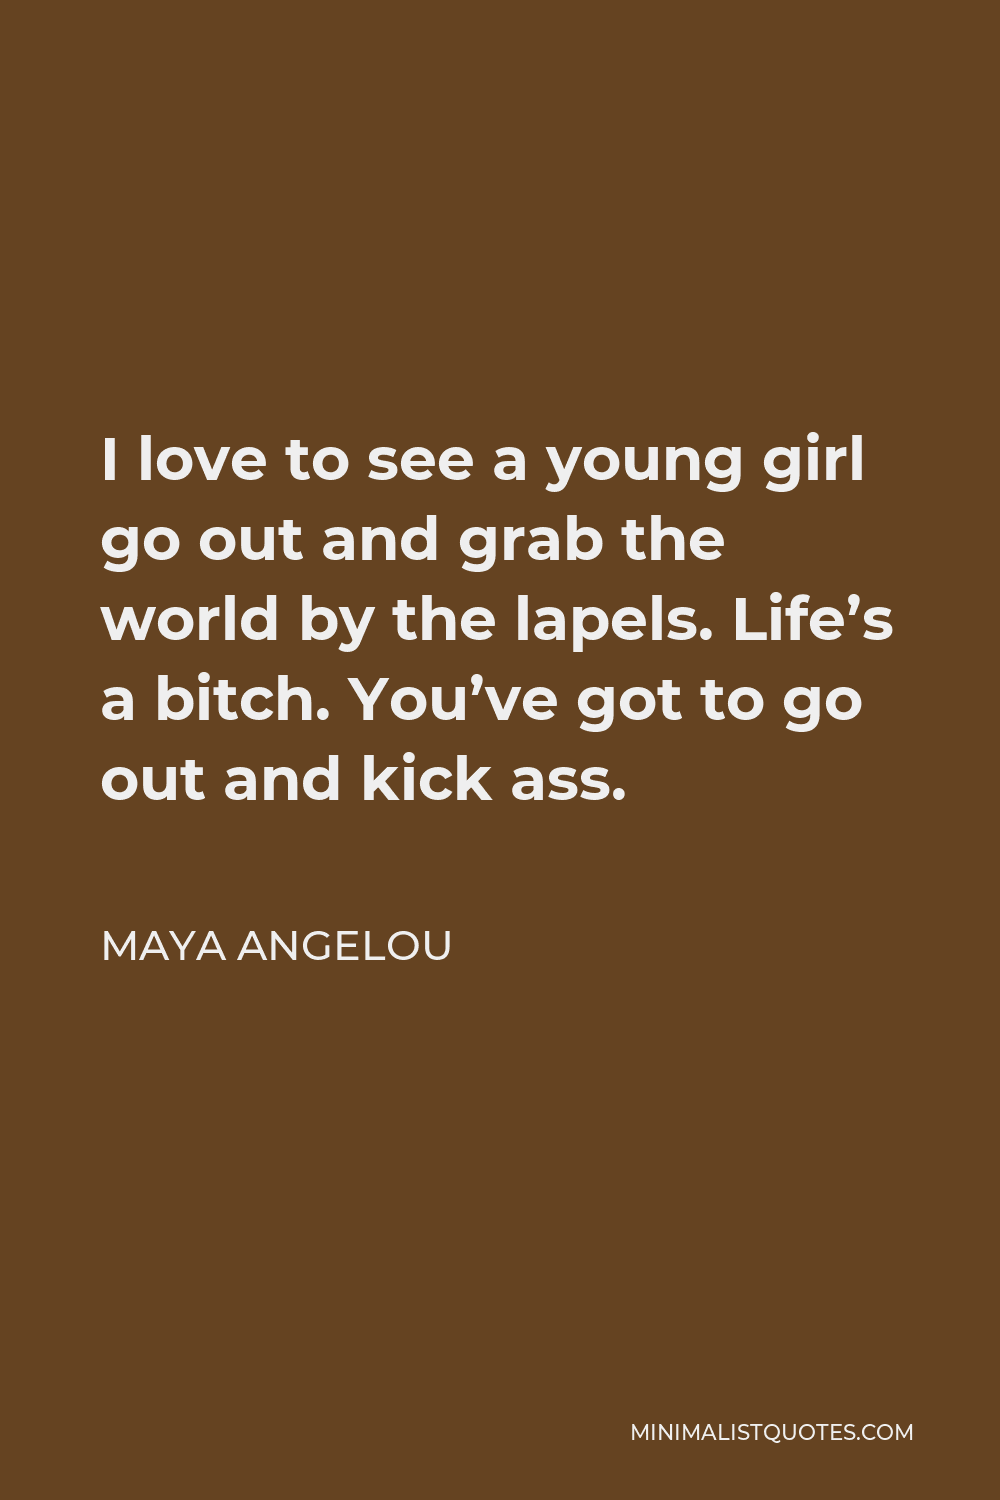 Maya Angelou Quote - I love to see a young girl go out and grab the world by the lapels. Life’s a bitch. You’ve got to go out and kick ass.